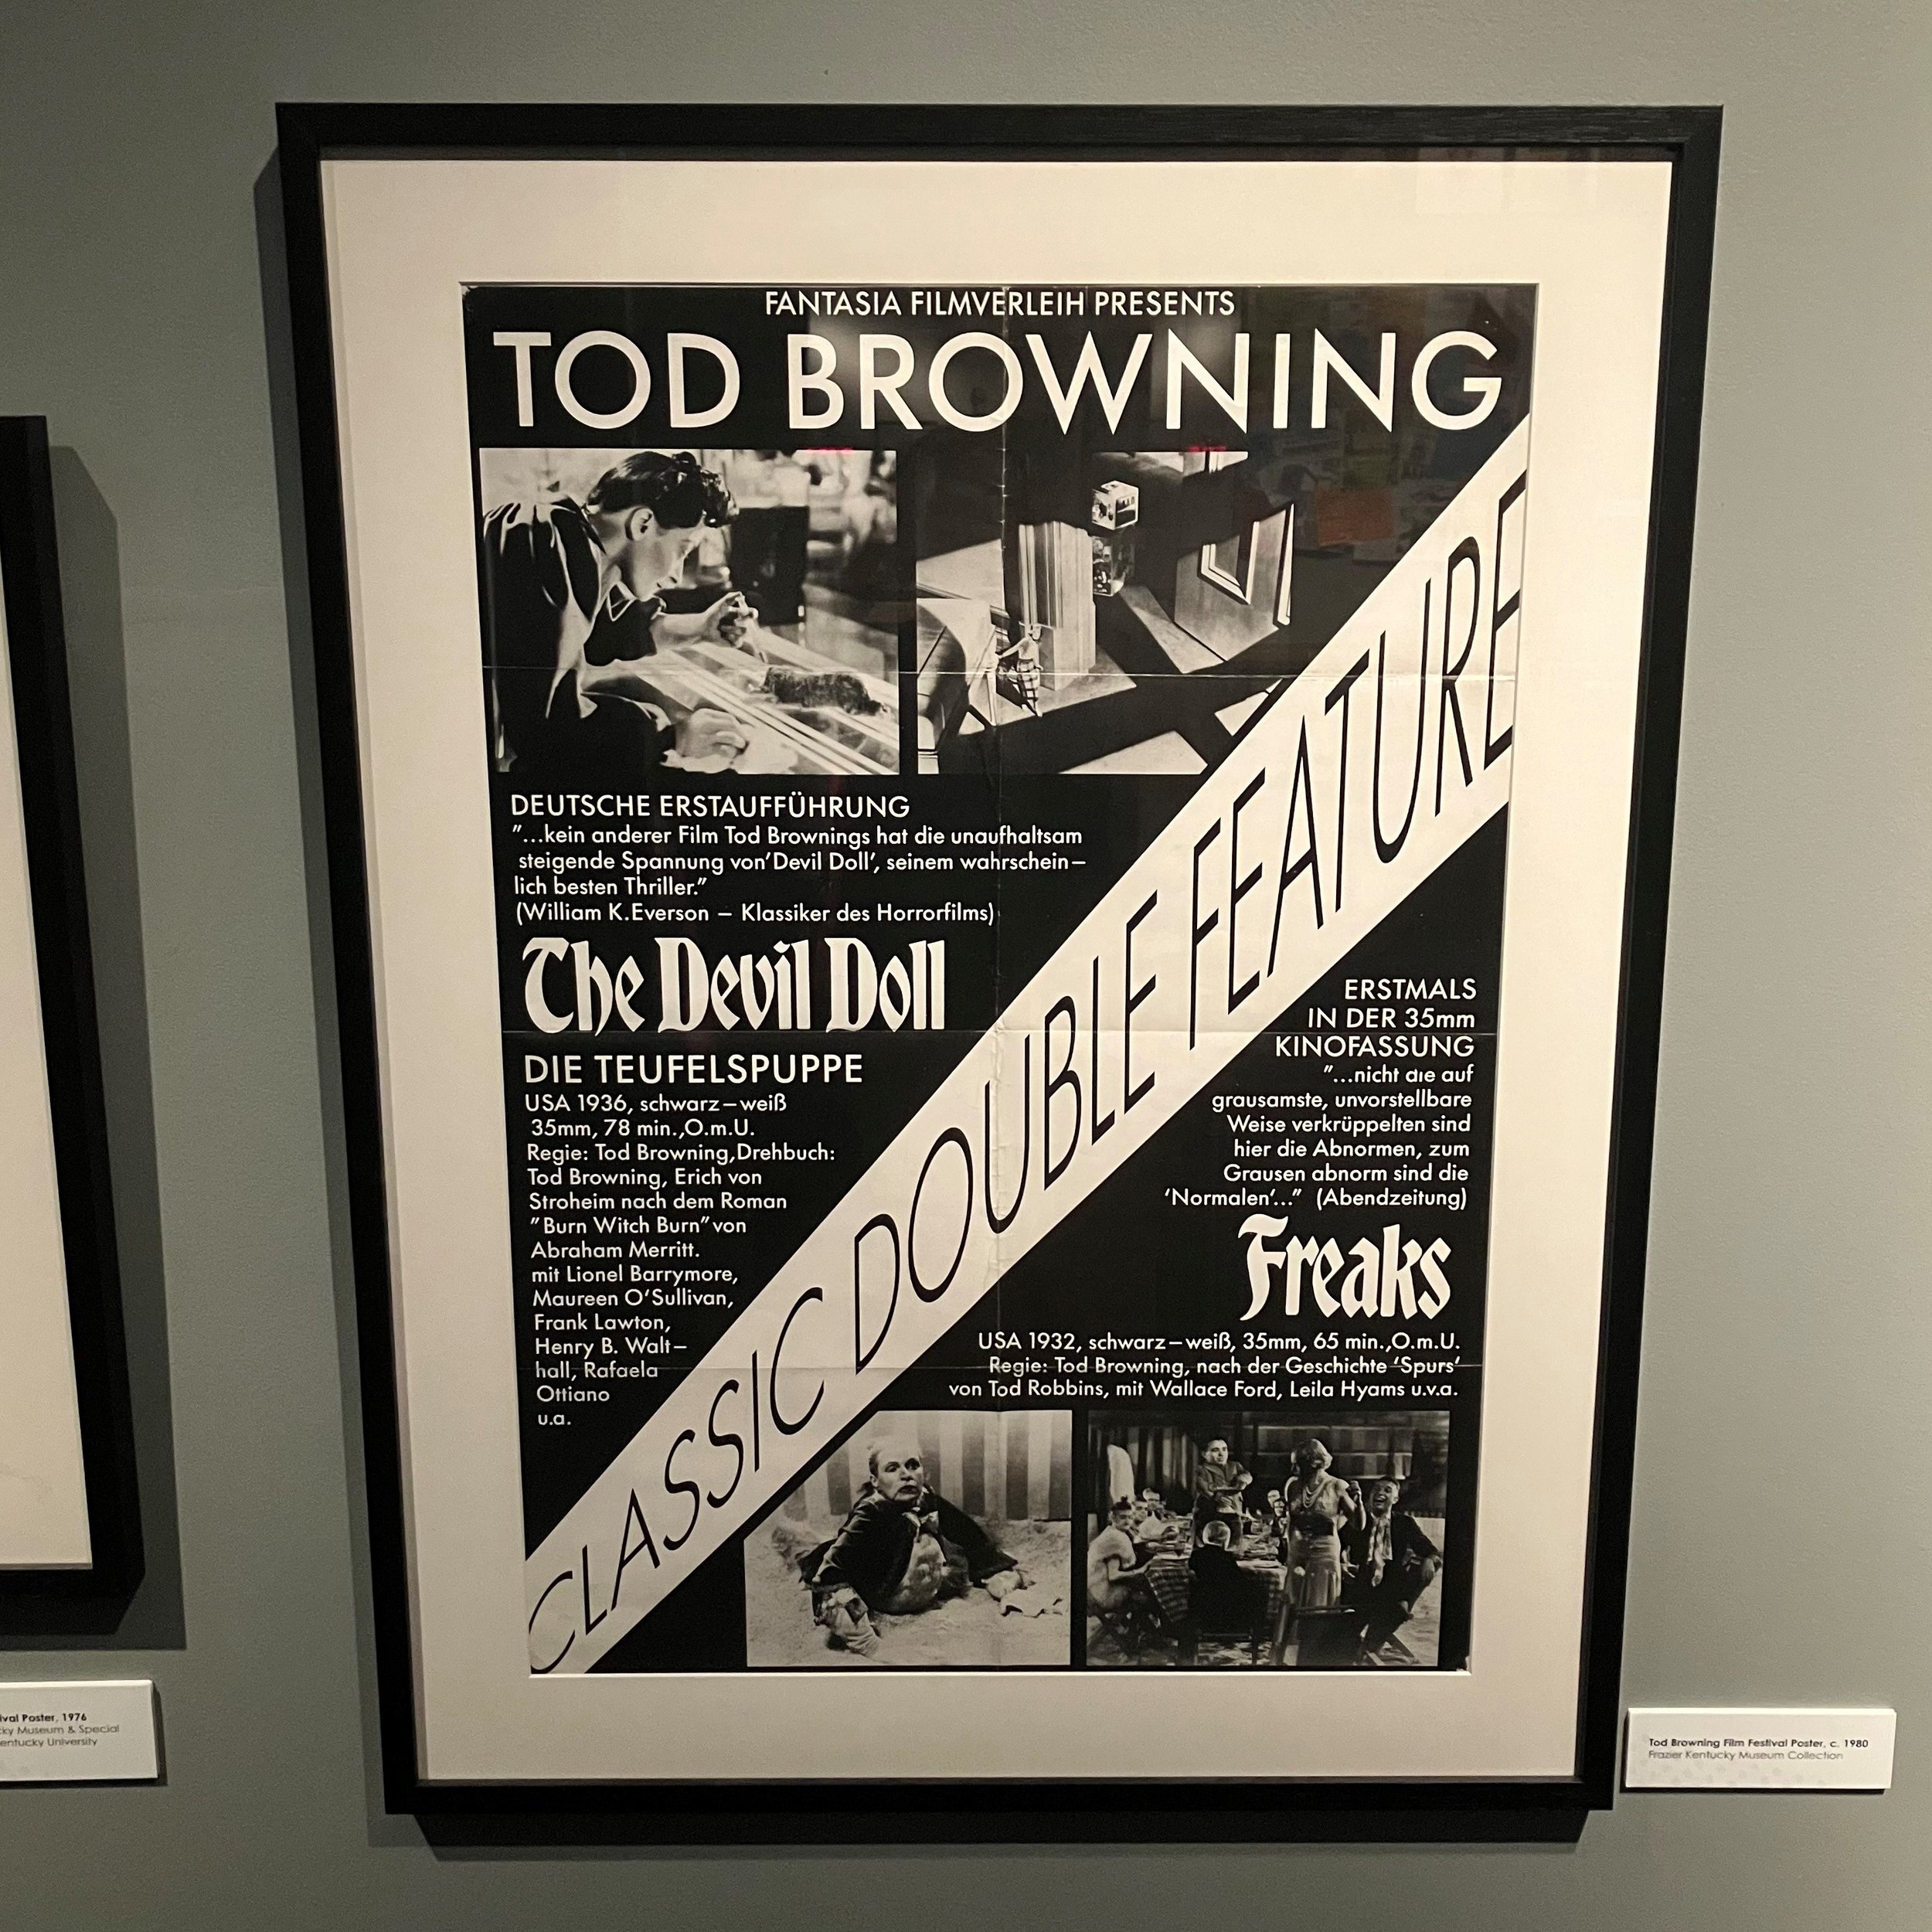 Canada Trip with (Un)Known Project, Tod Browning's 1932 Film Freaks, Mick &  Kent Cover Dwight Yoakam, and More | Frazier History Museum